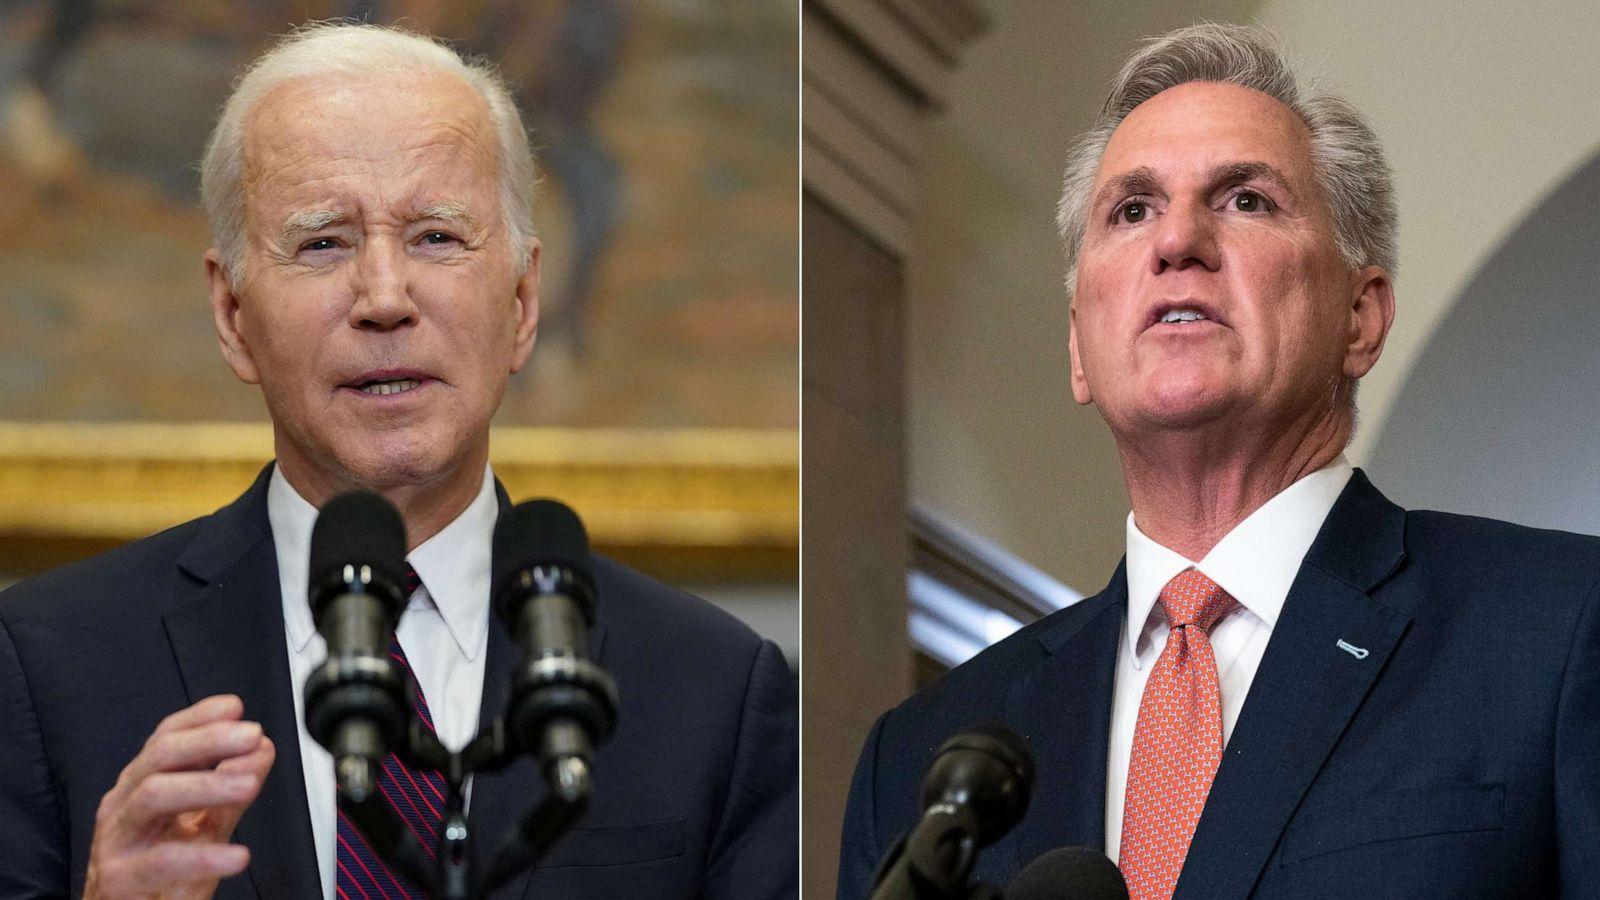 U.S. President Joe Biden and Kevin McCarthy are reportedly close to an agreement on raising the U.S. debt ceiling